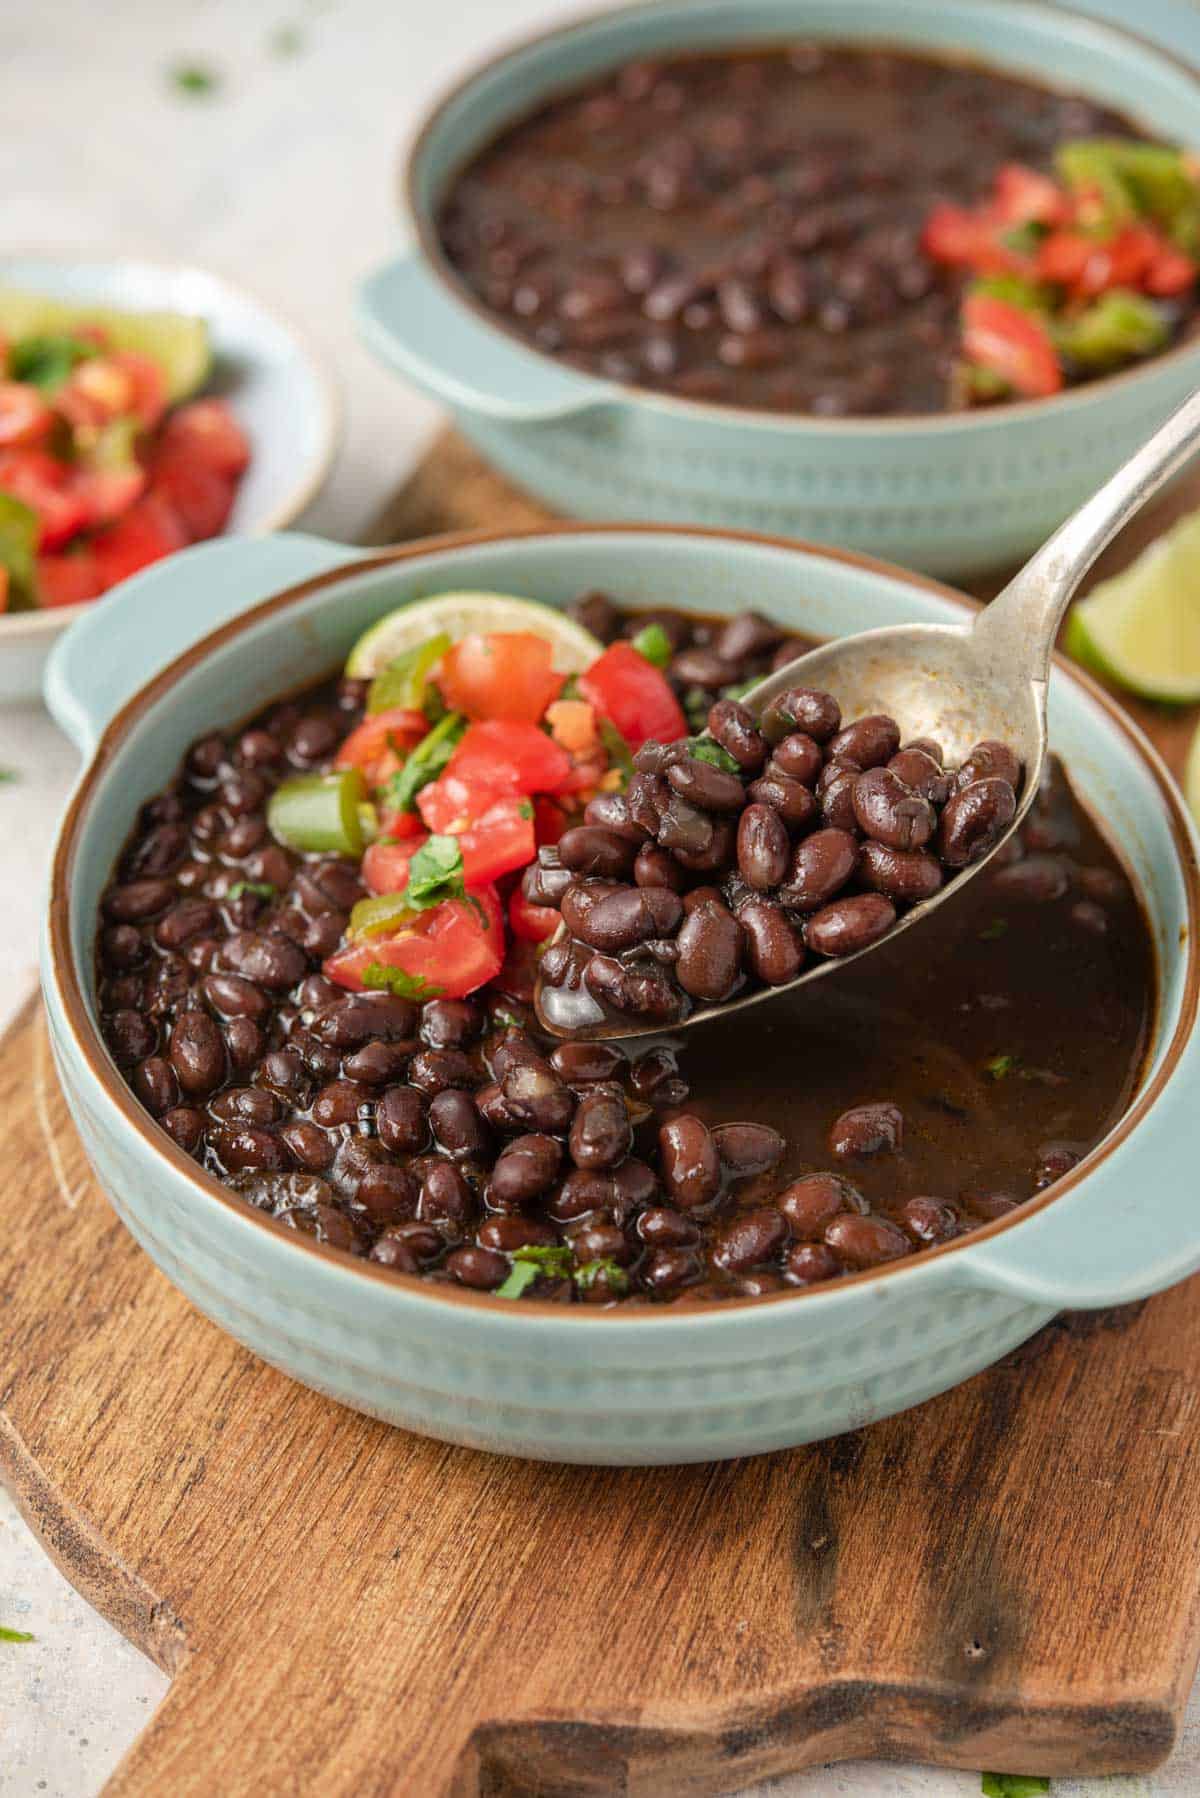 A close up of a spoonful of black beans